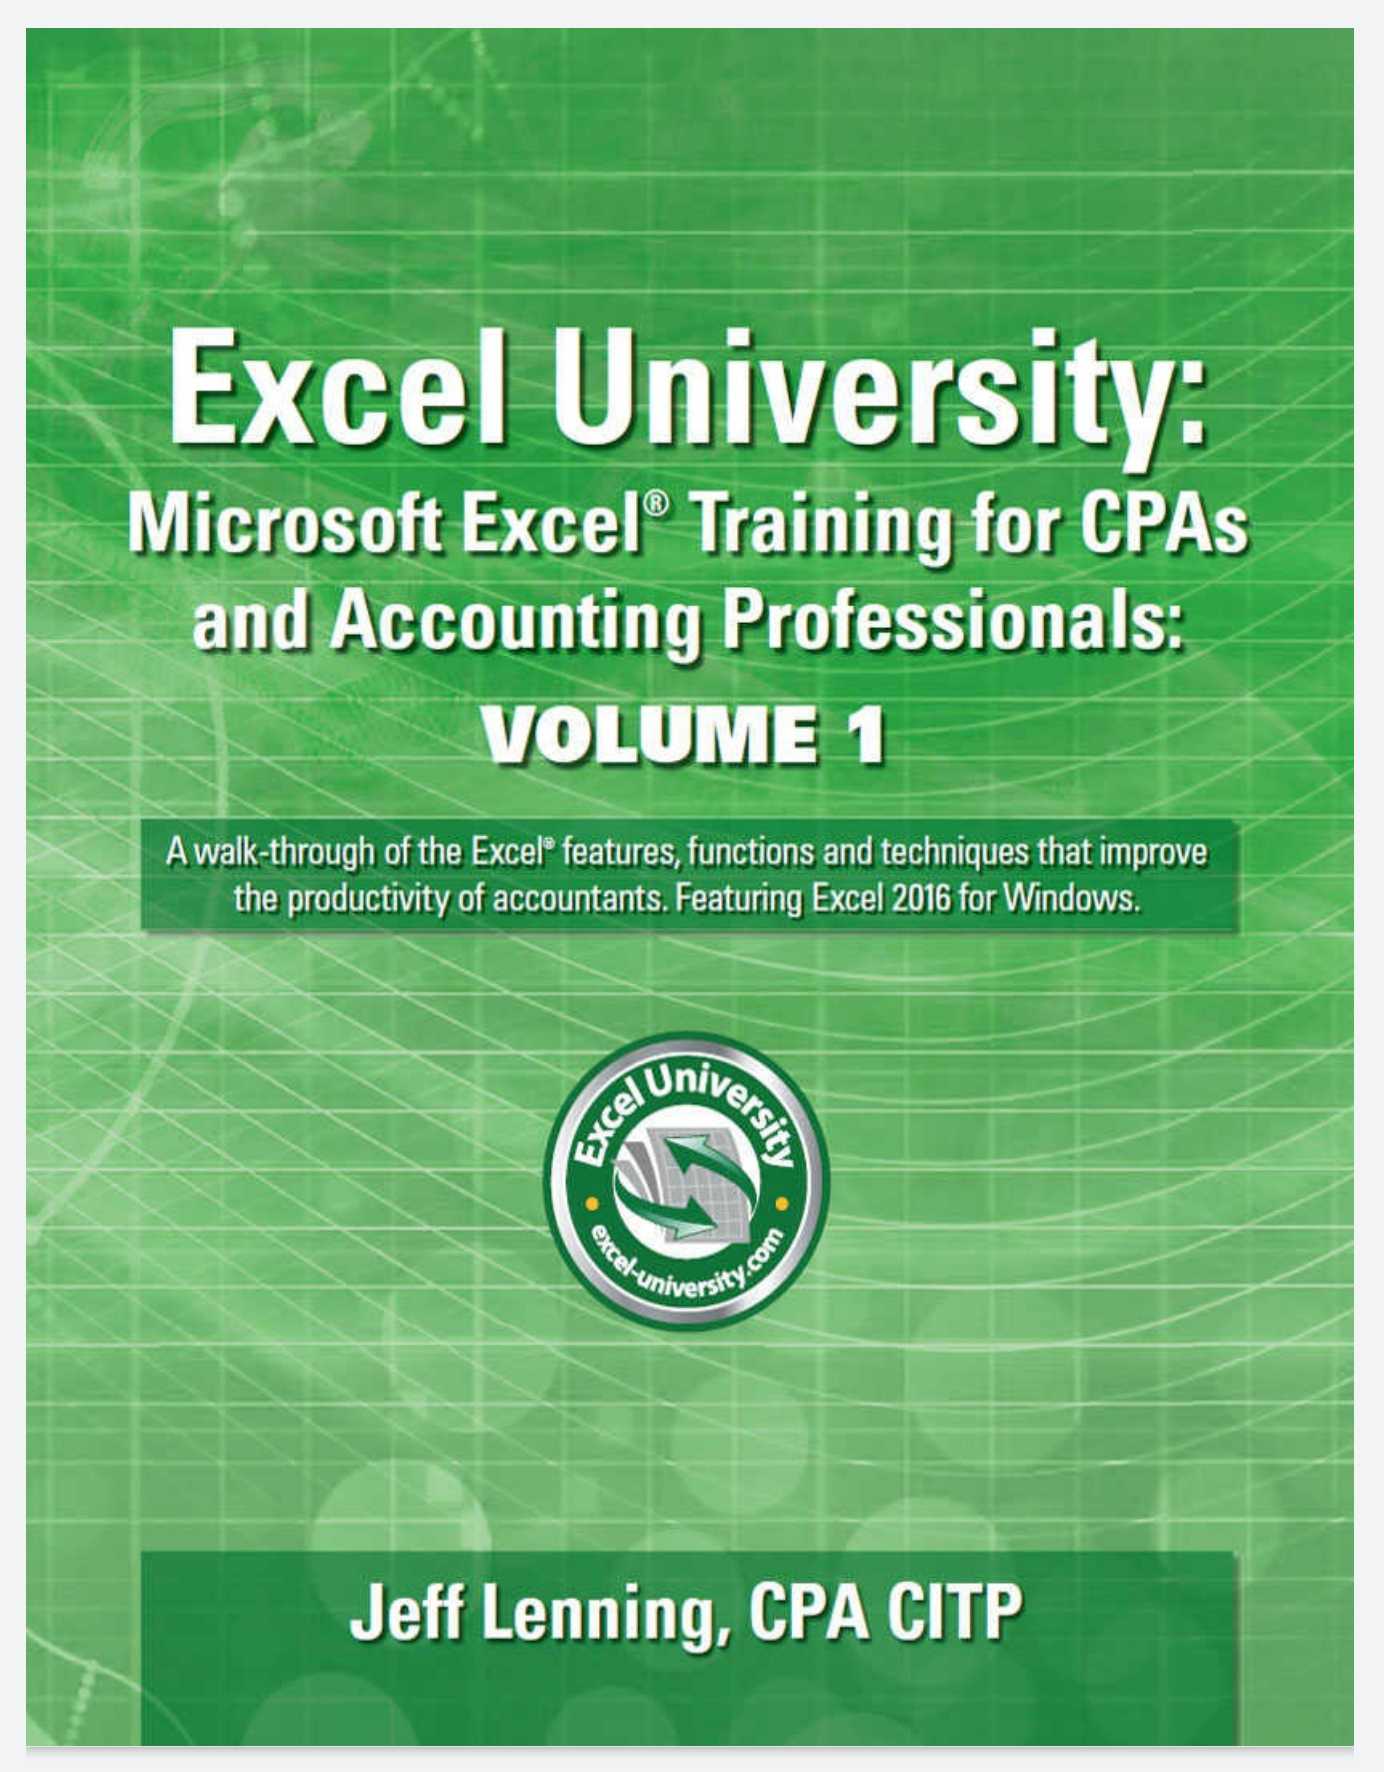 Excel University. Microsoft Excel Training for CPAs and Accounting Professionals. Volume 1. Featuring Excel 2019 for Windows